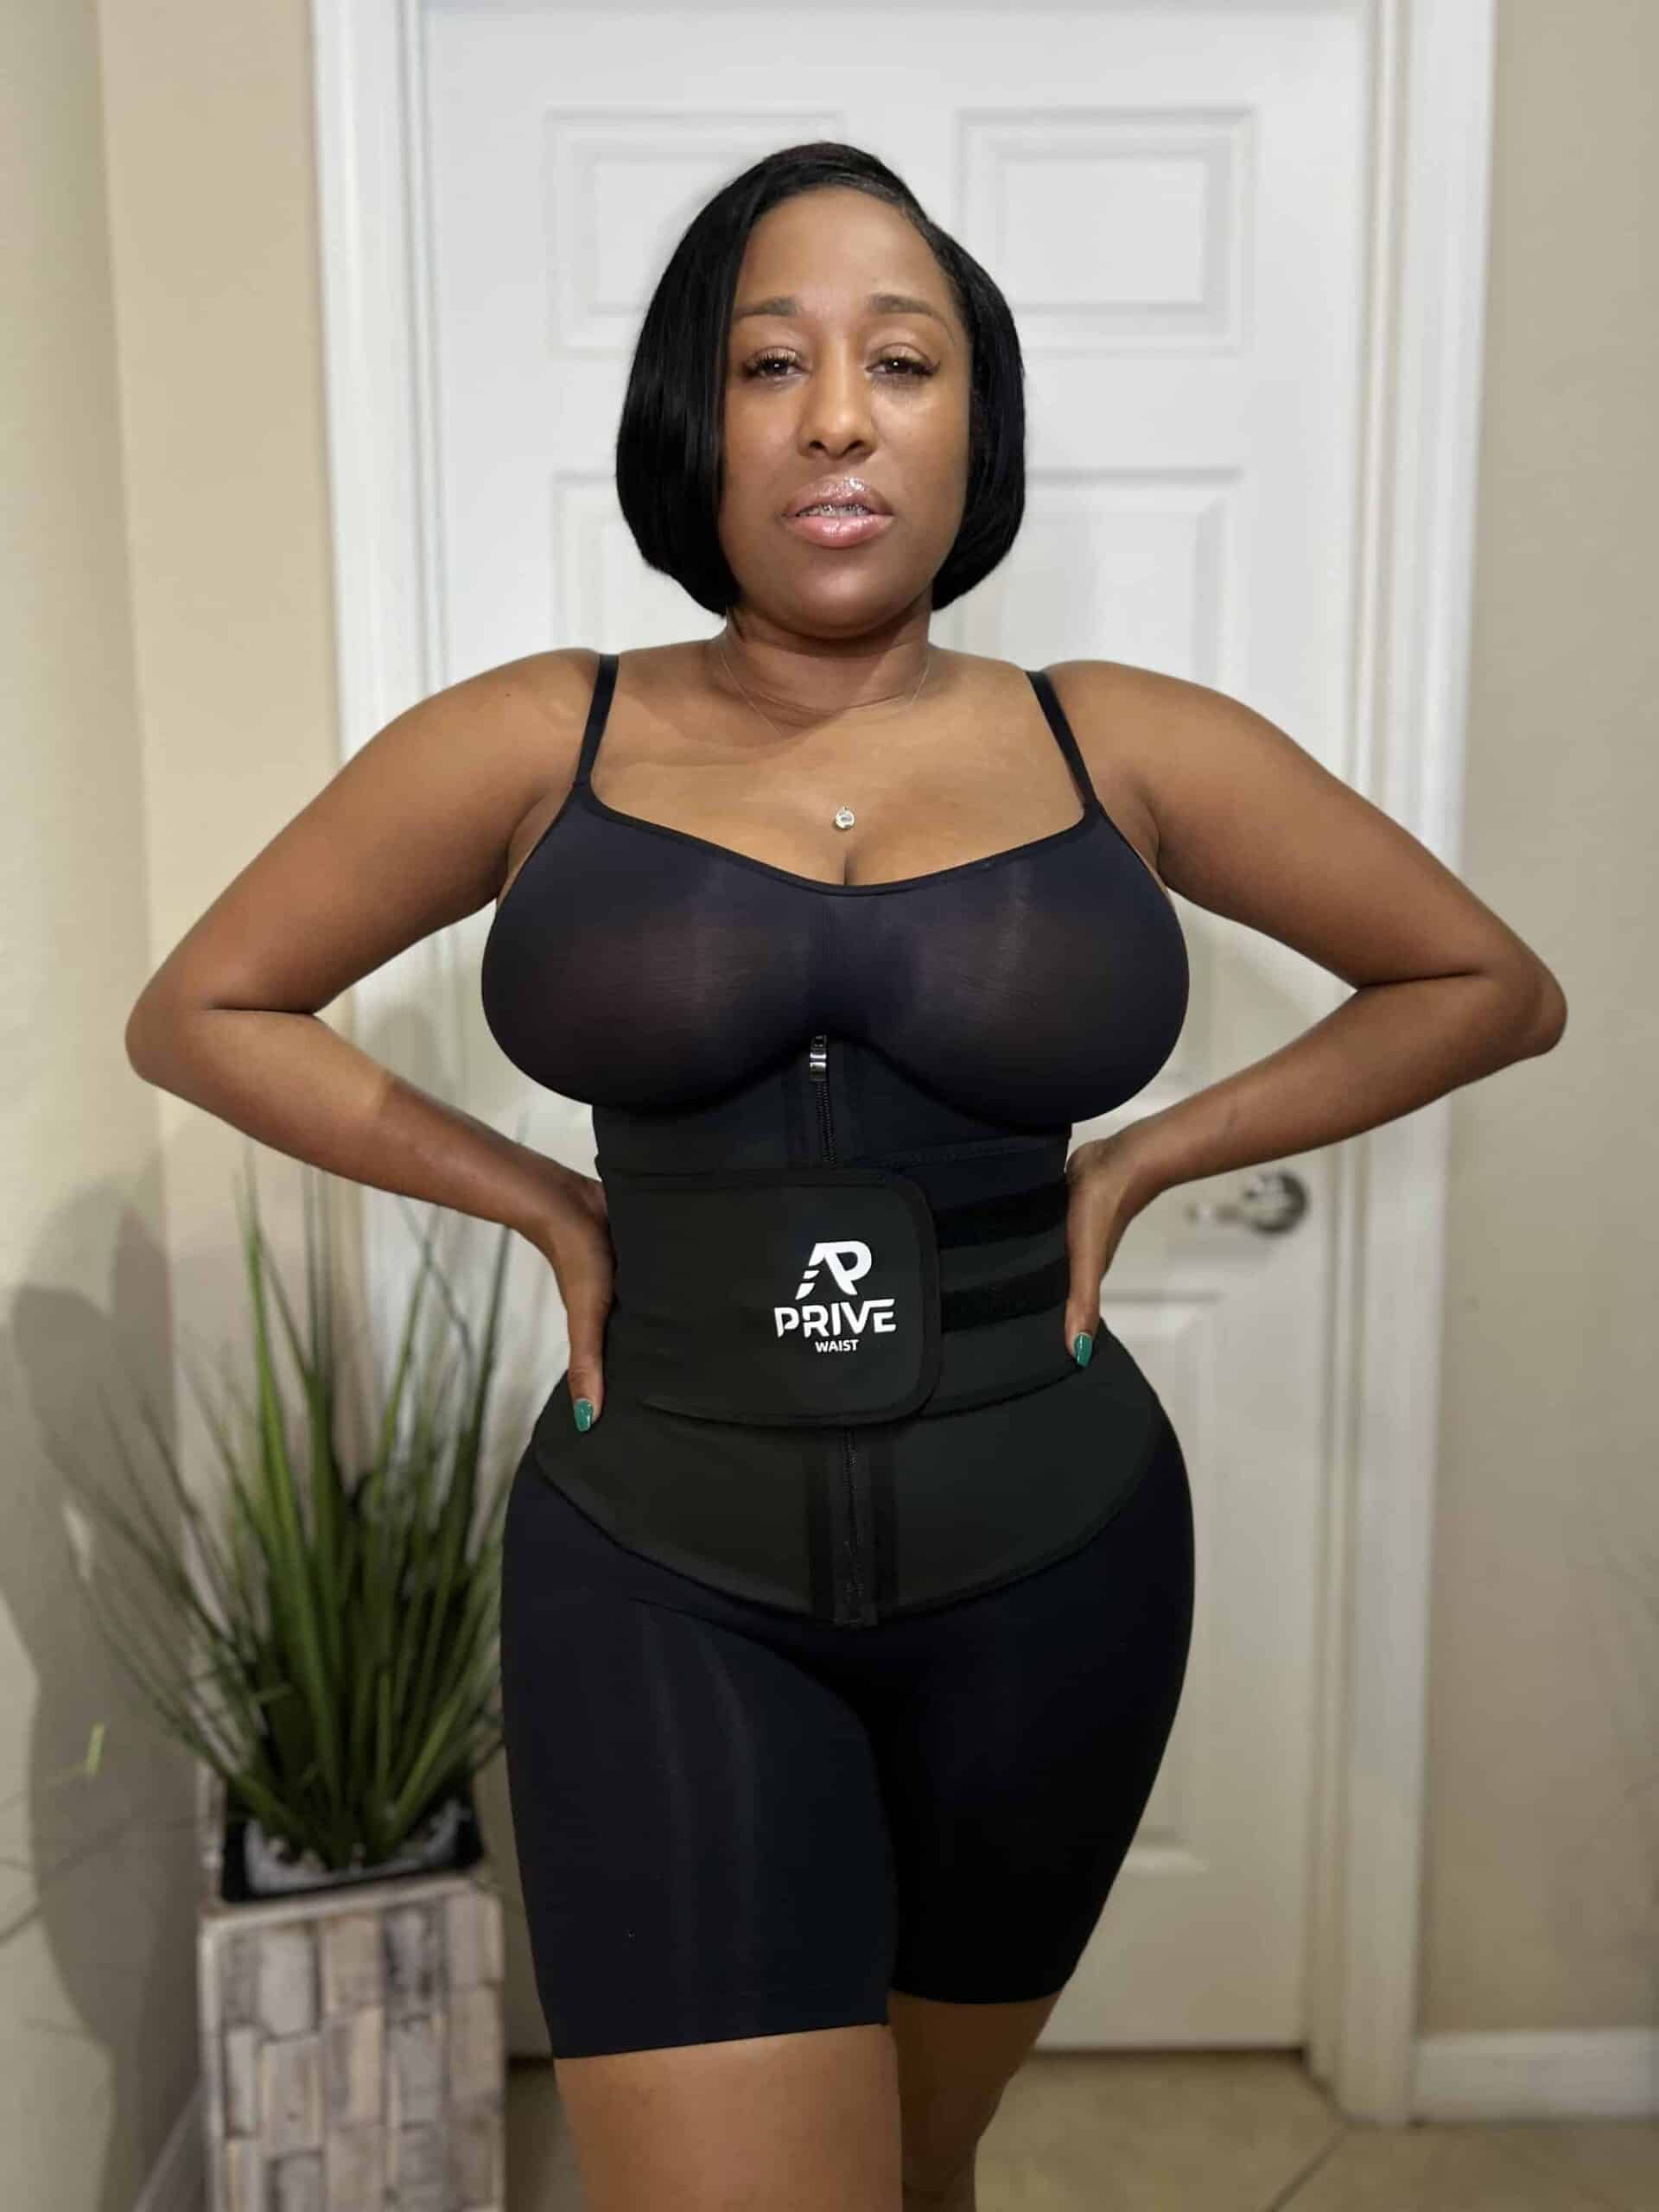 Celebrity Style Boutique, SpinteX Road - Get this Amazing Waist Trainer  @mycurvyappeal @celebritystyle_boutique ———————- The best part about this Waist  Trainer is that it remains invisible under clothing and it is comfortable